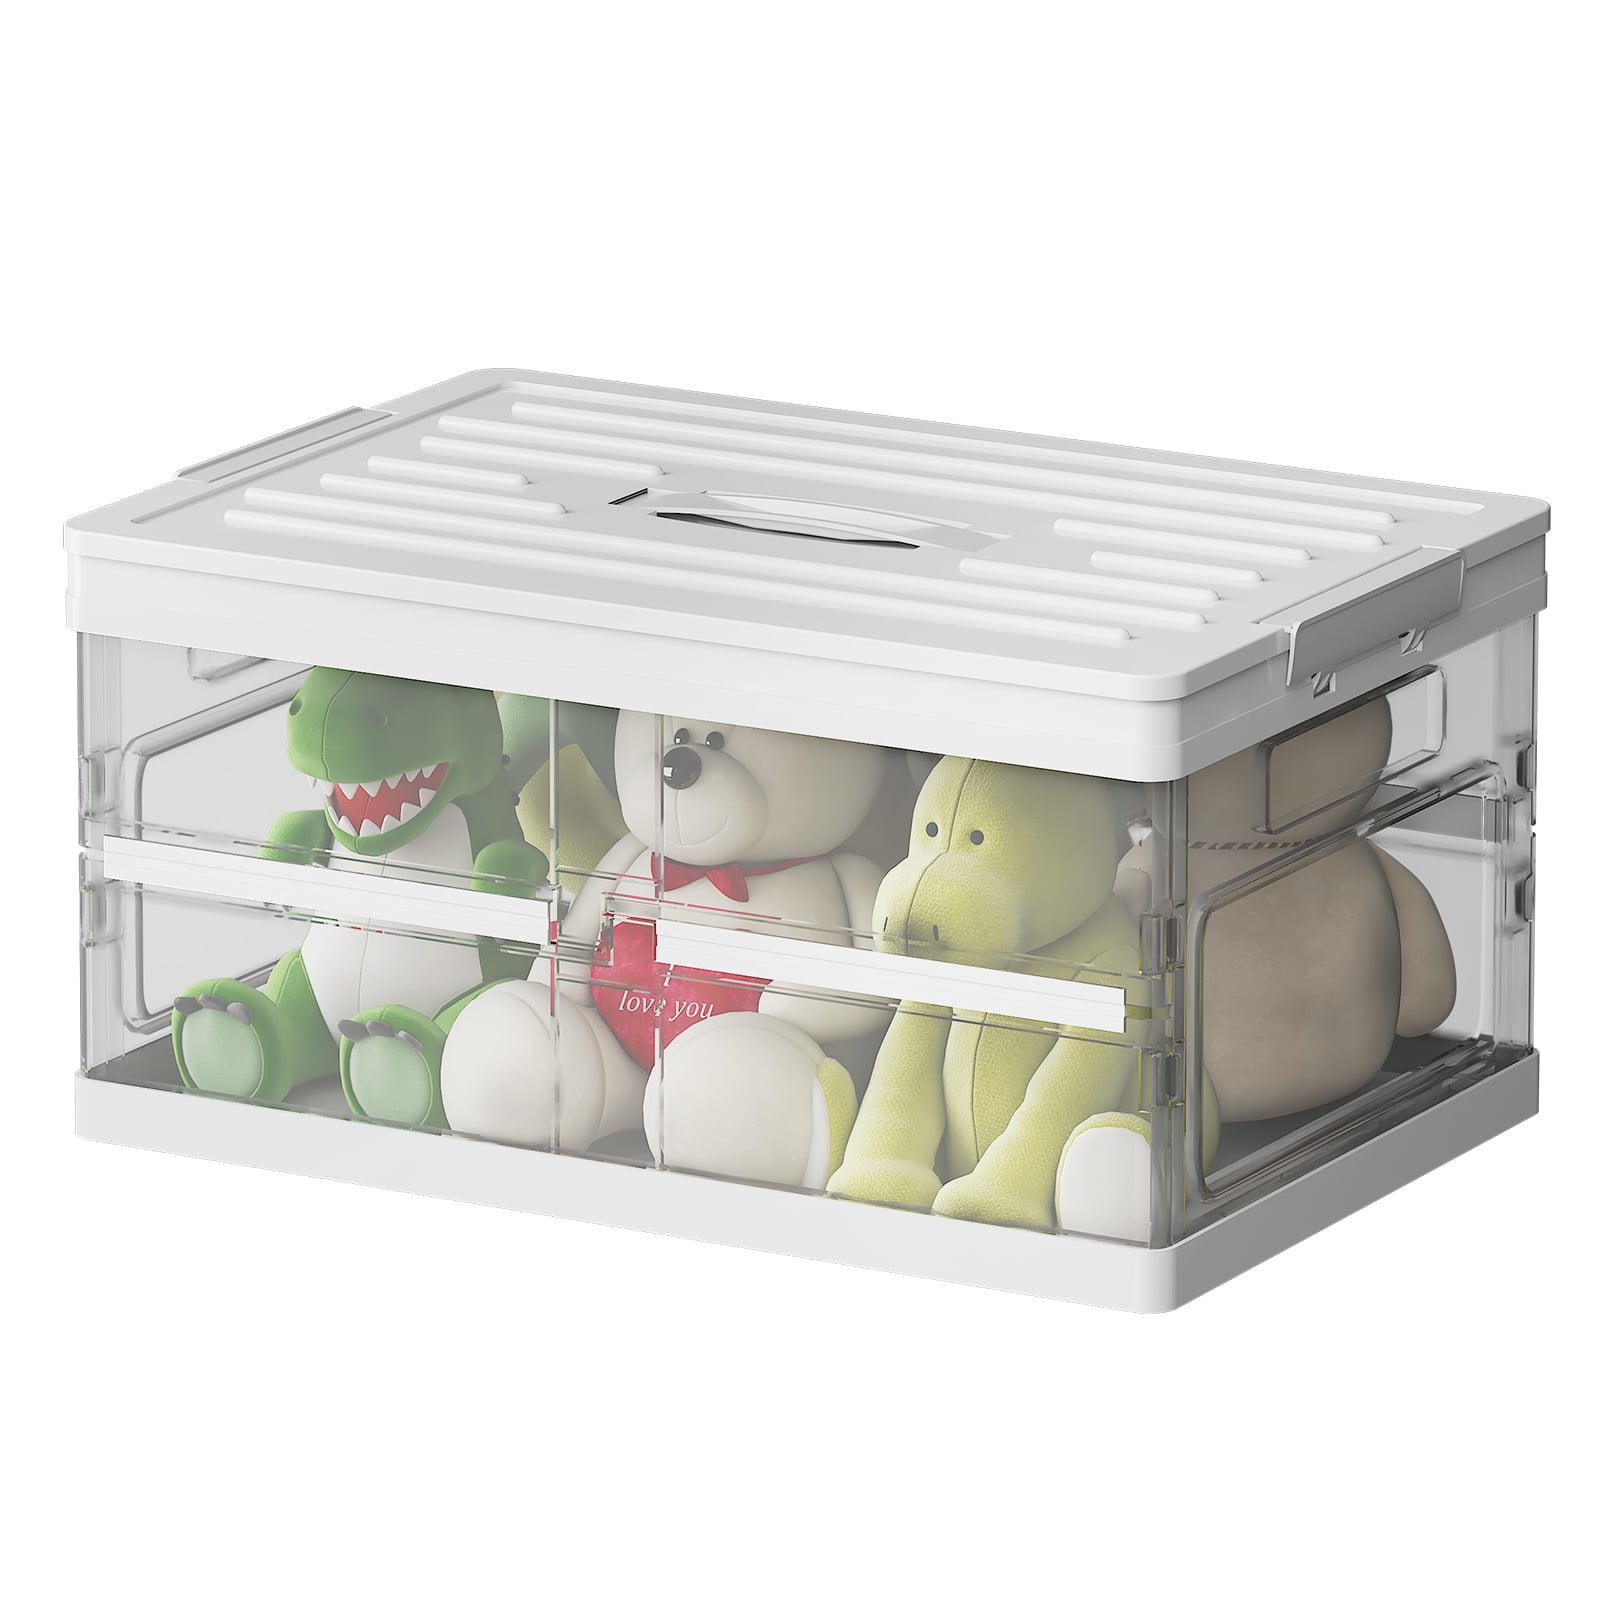 Wisdom Star Collapsible Storage Bins with Lids, Clear Plastic